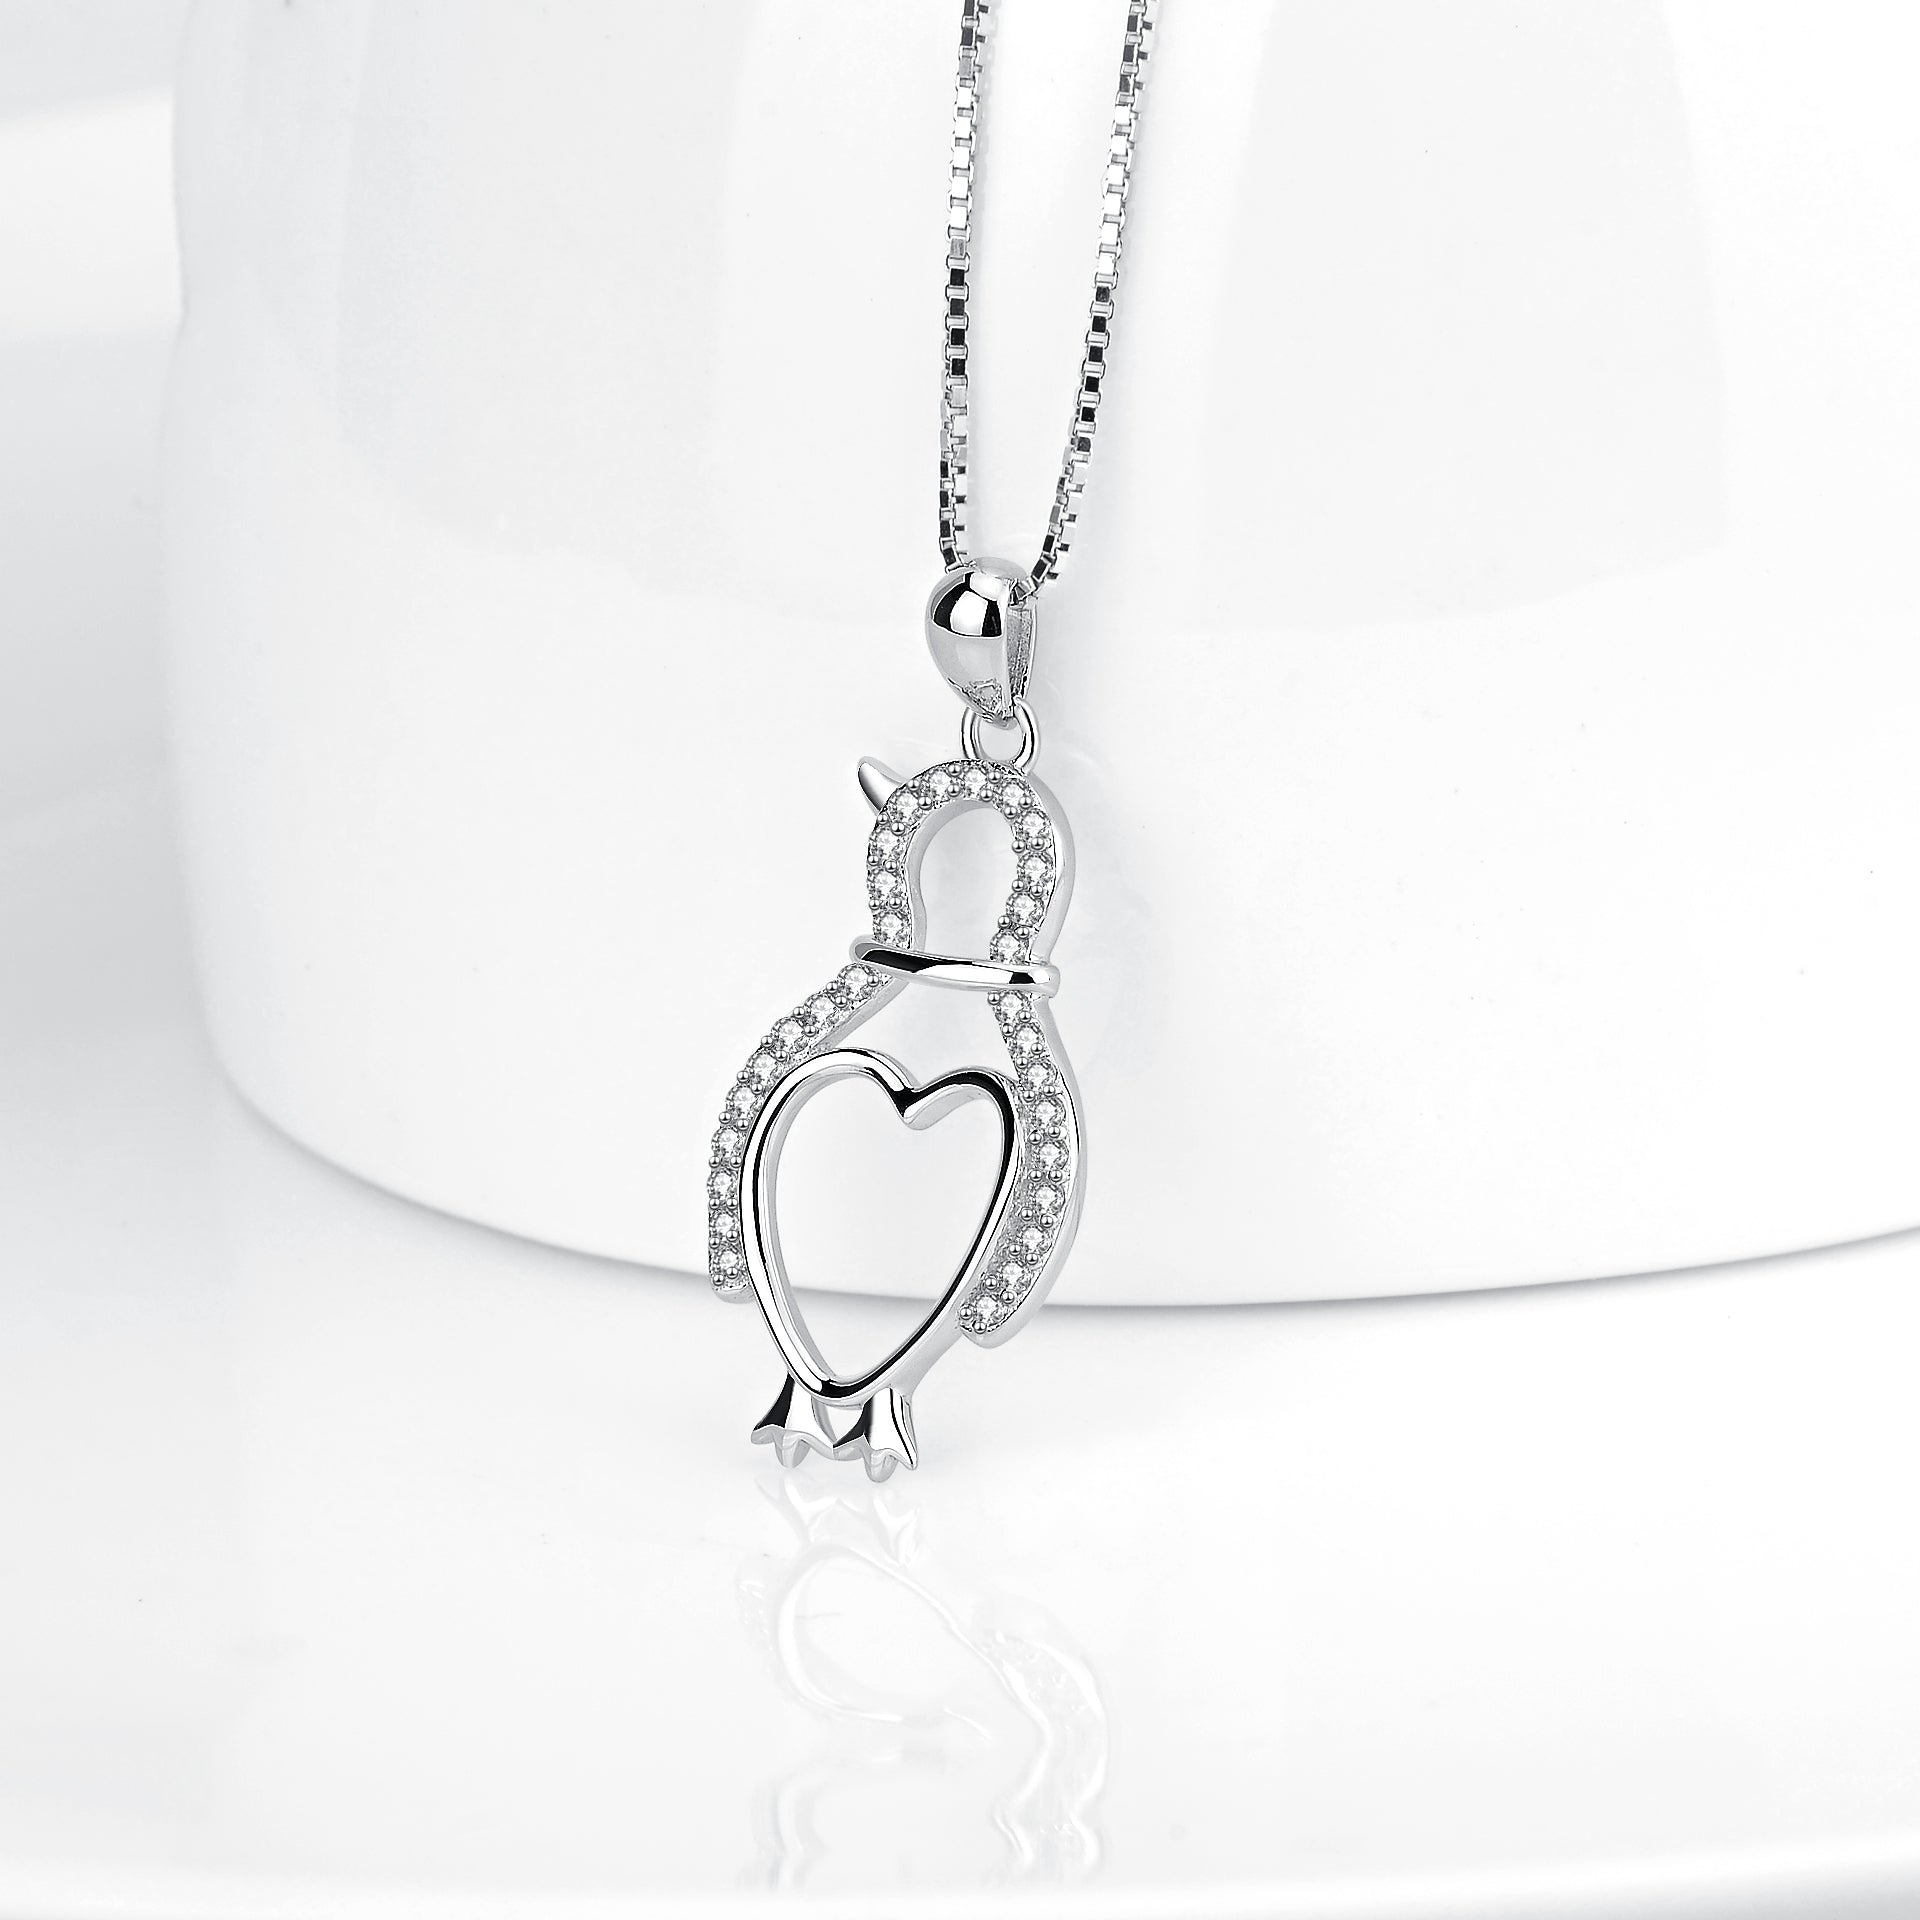 Adorable penguin necklace made of sterling silver in the shape of an Antarctic penguin